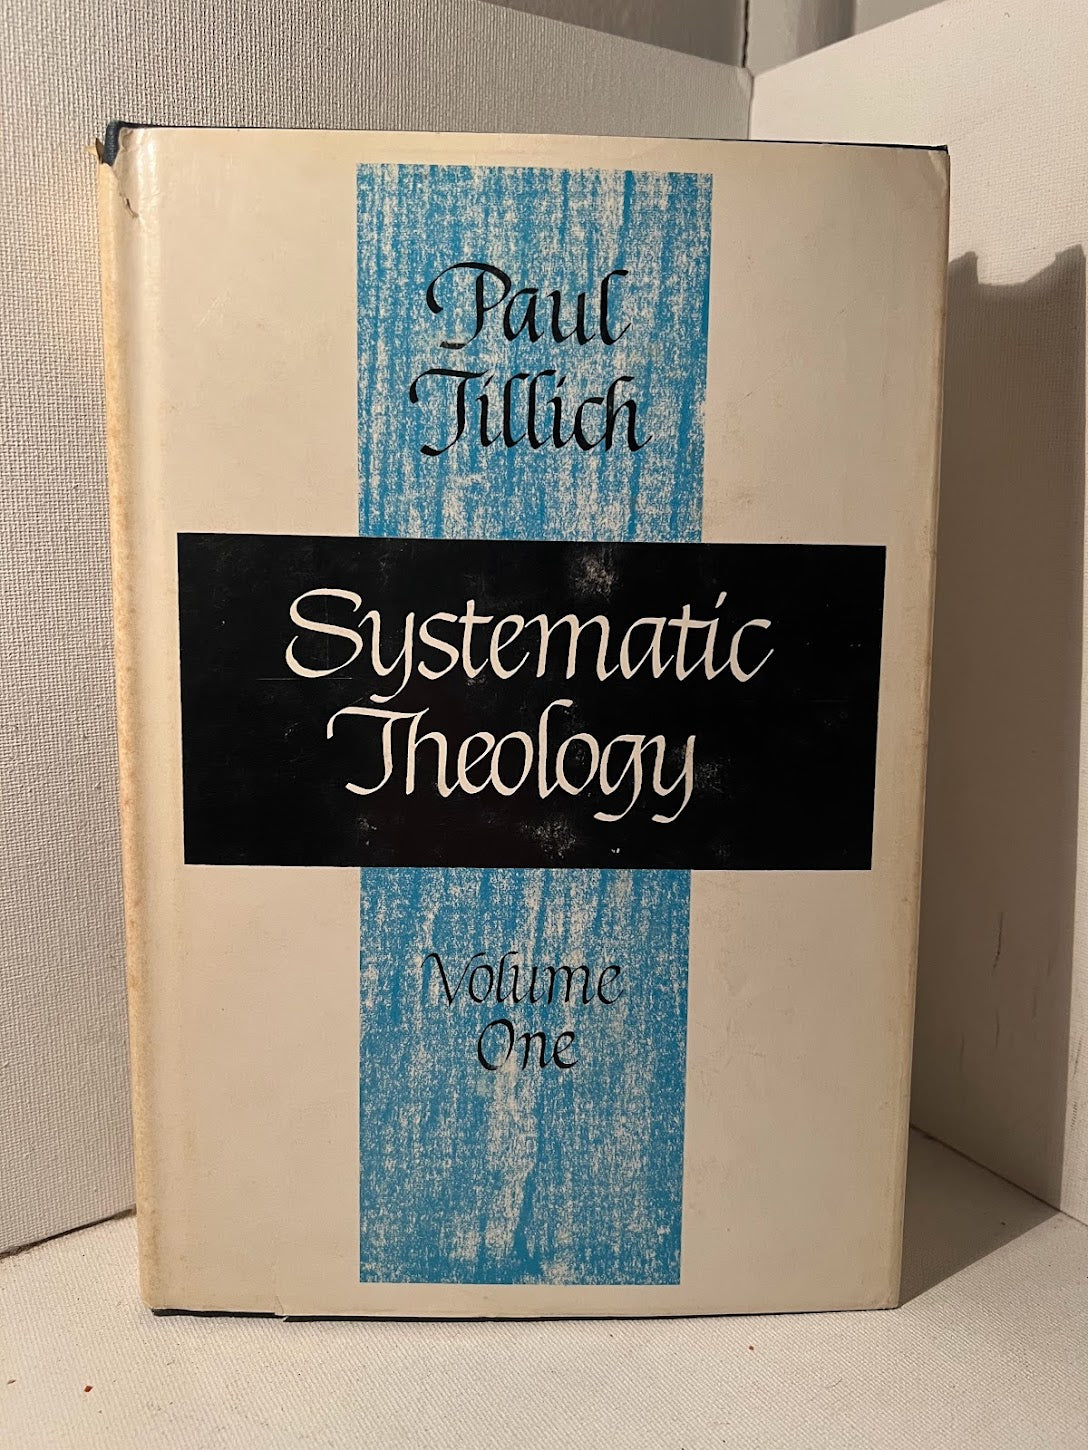 Systematic Theology by Paul Tillich